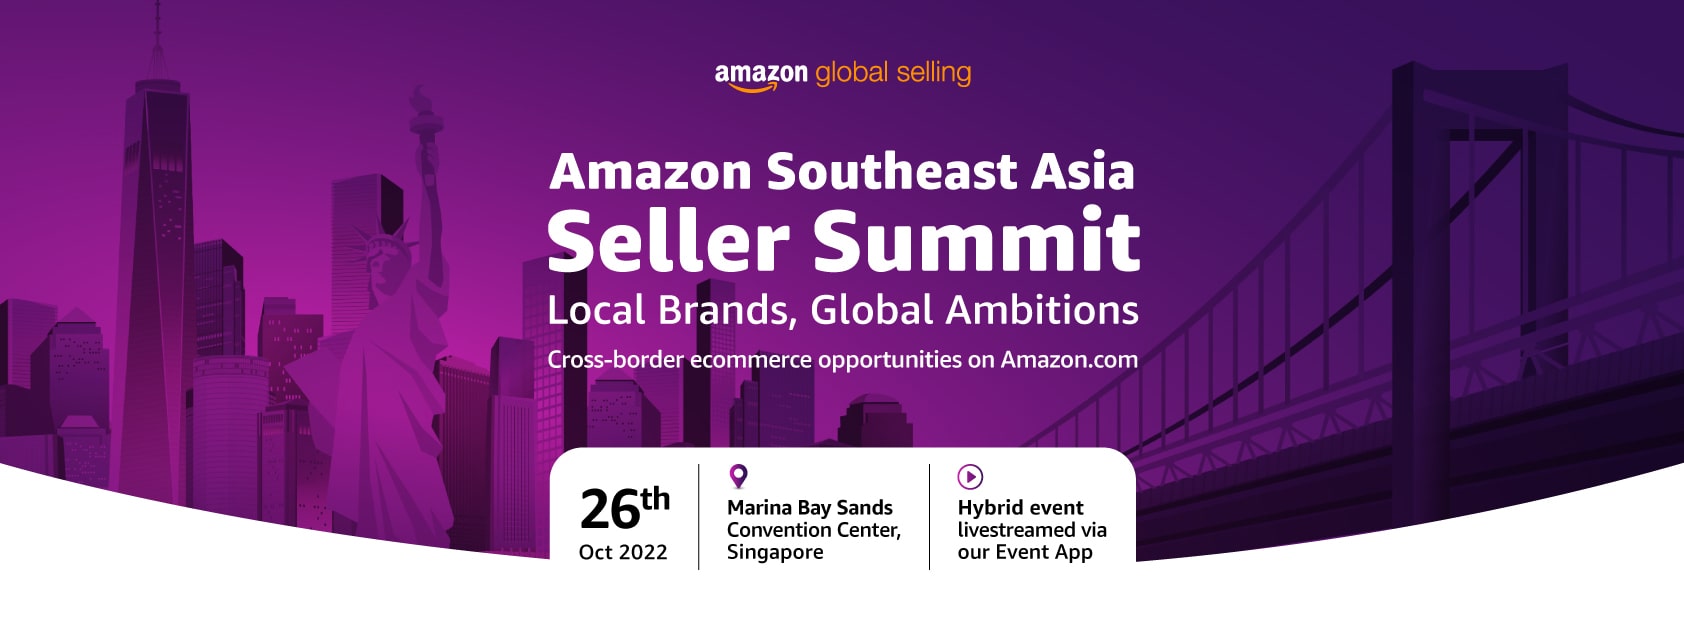 Amazon online business in Singapore